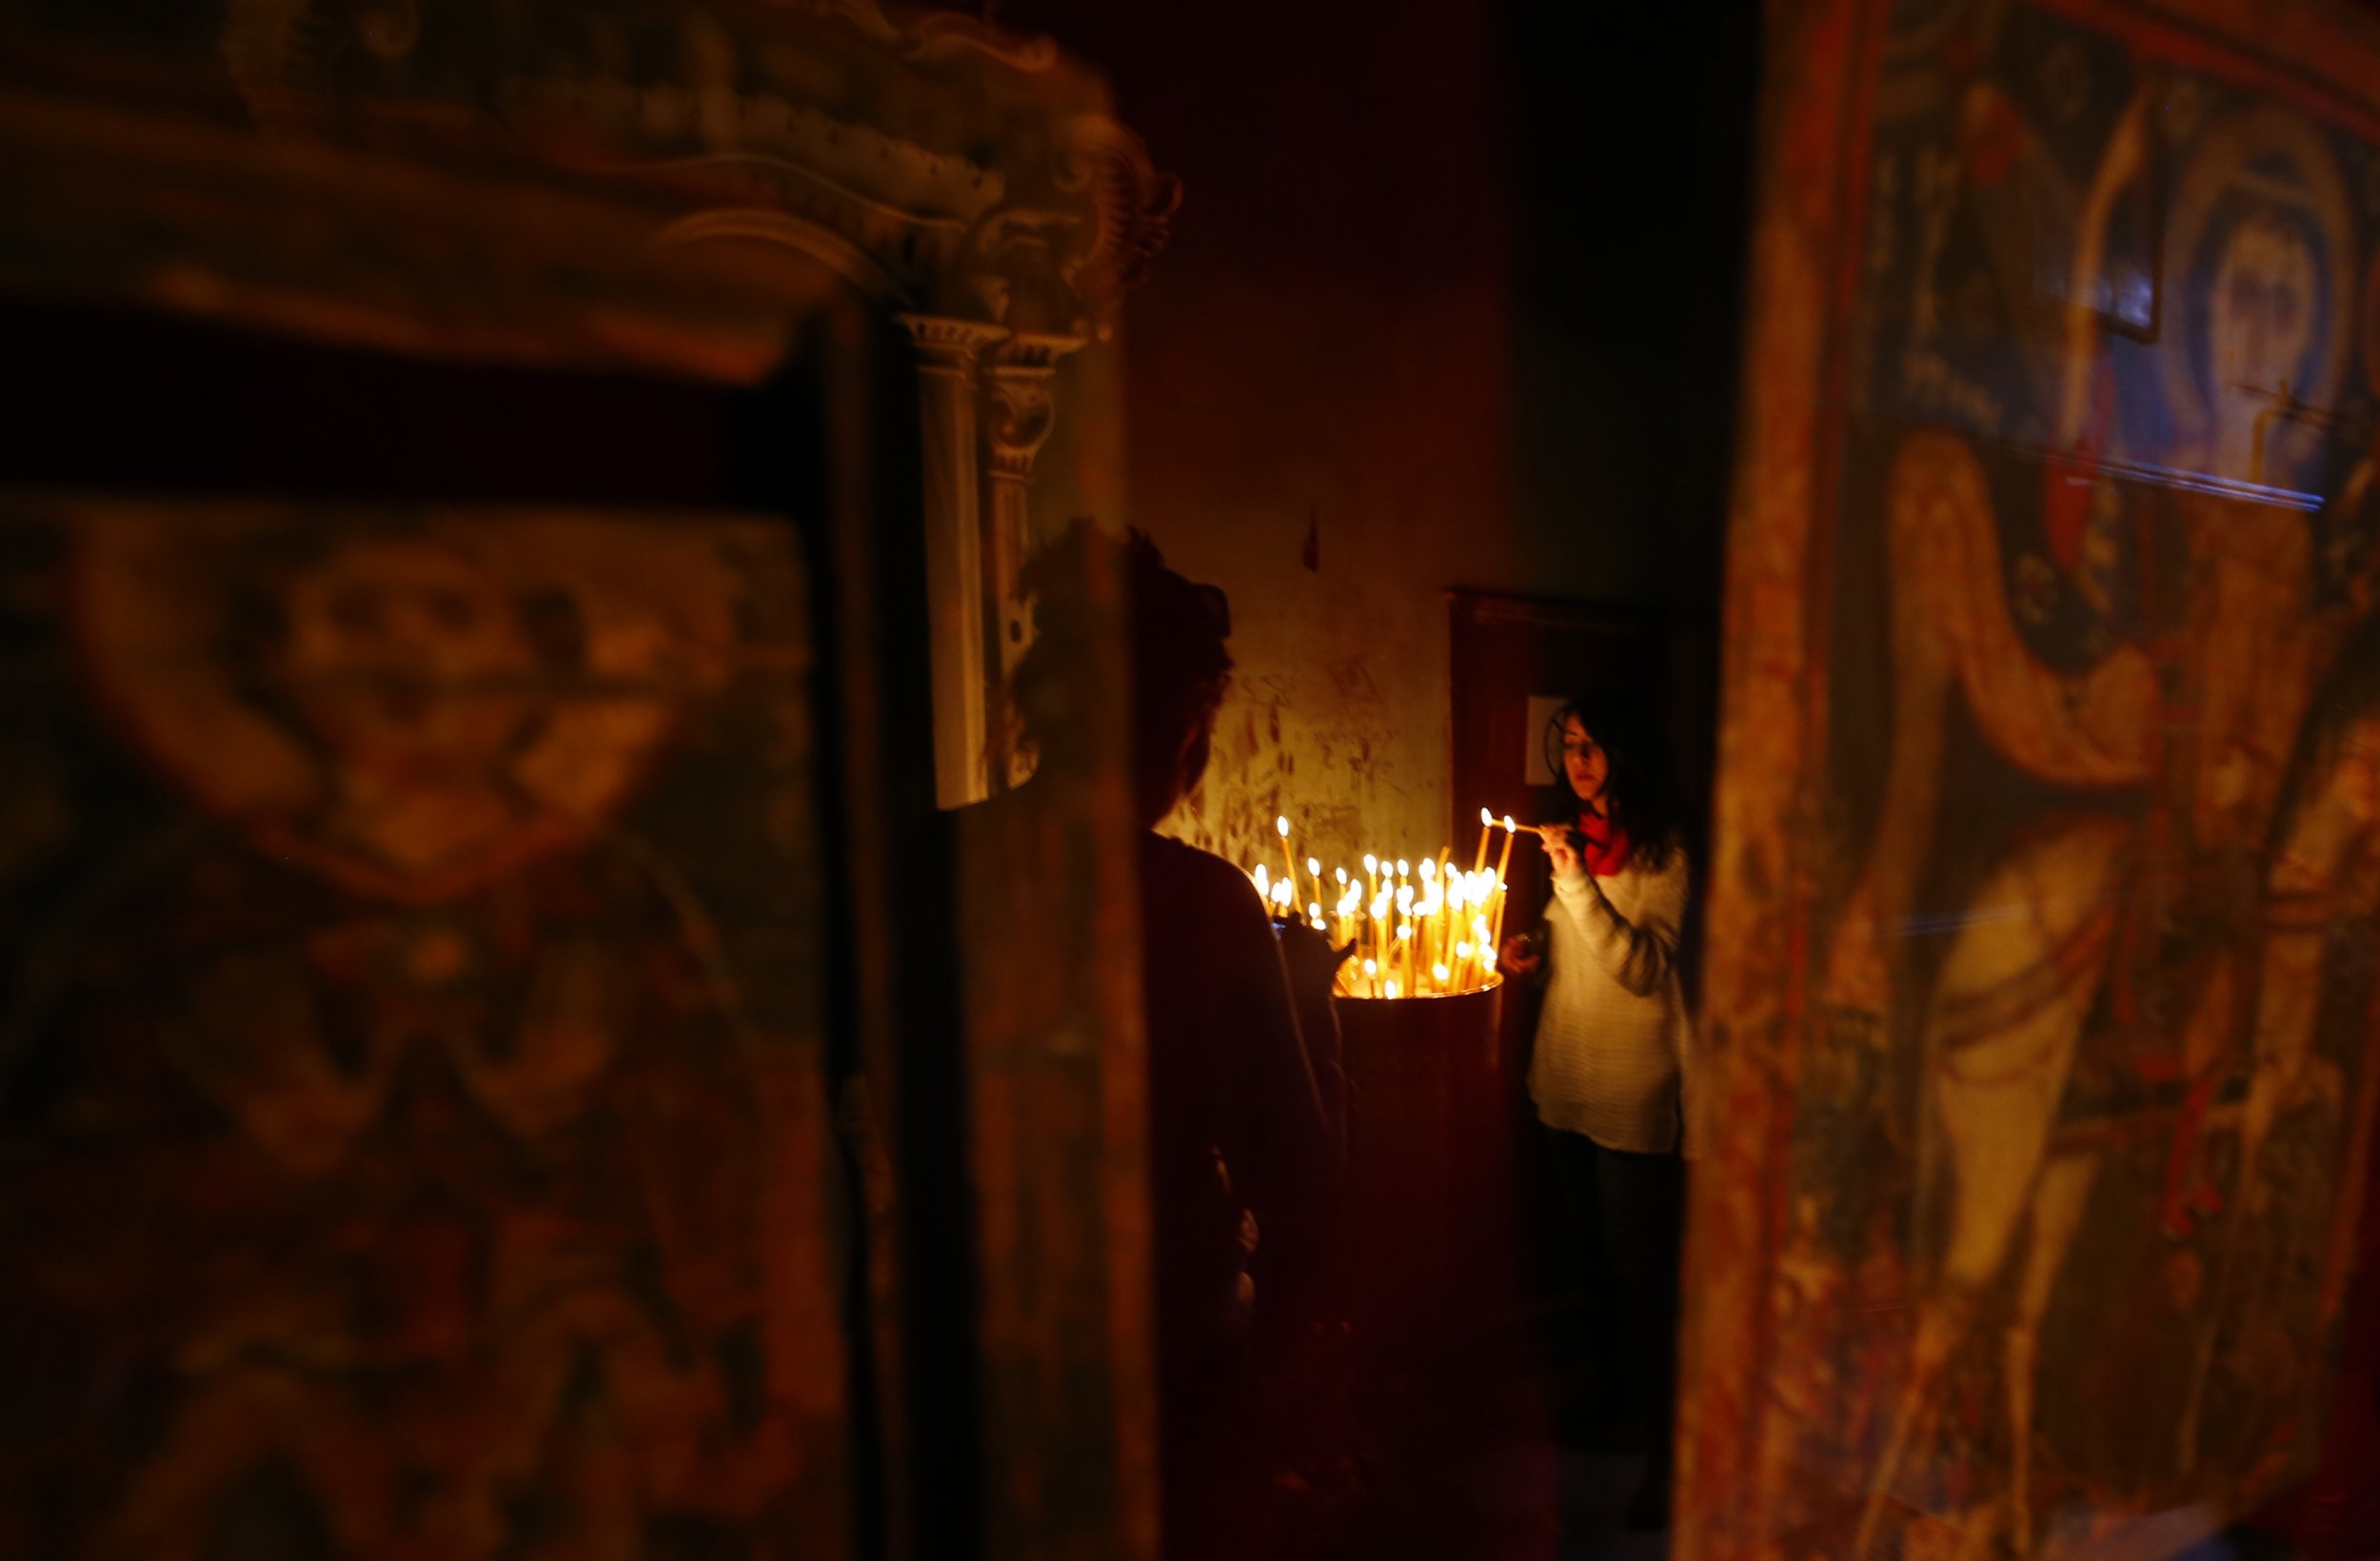 Christian lights candle in Sinai monastery